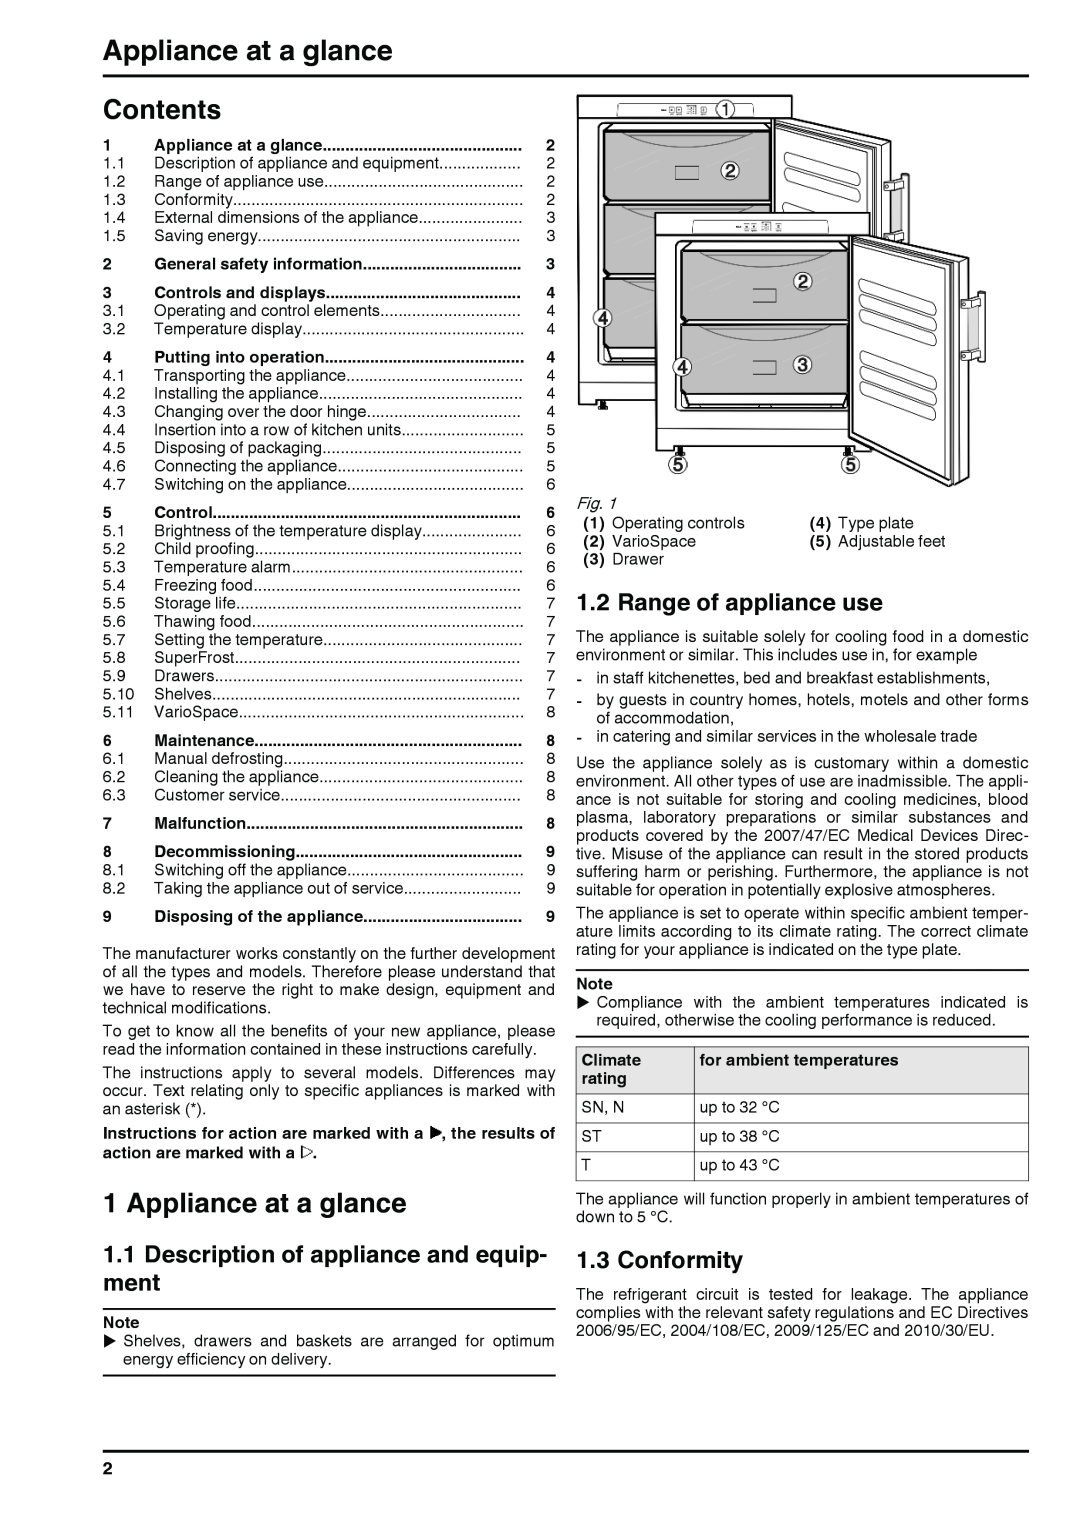 Liebherr 7081998-0 Appliance at a glance, Contents, 1.1Description of appliance and equip- ment, Range of appliance use 